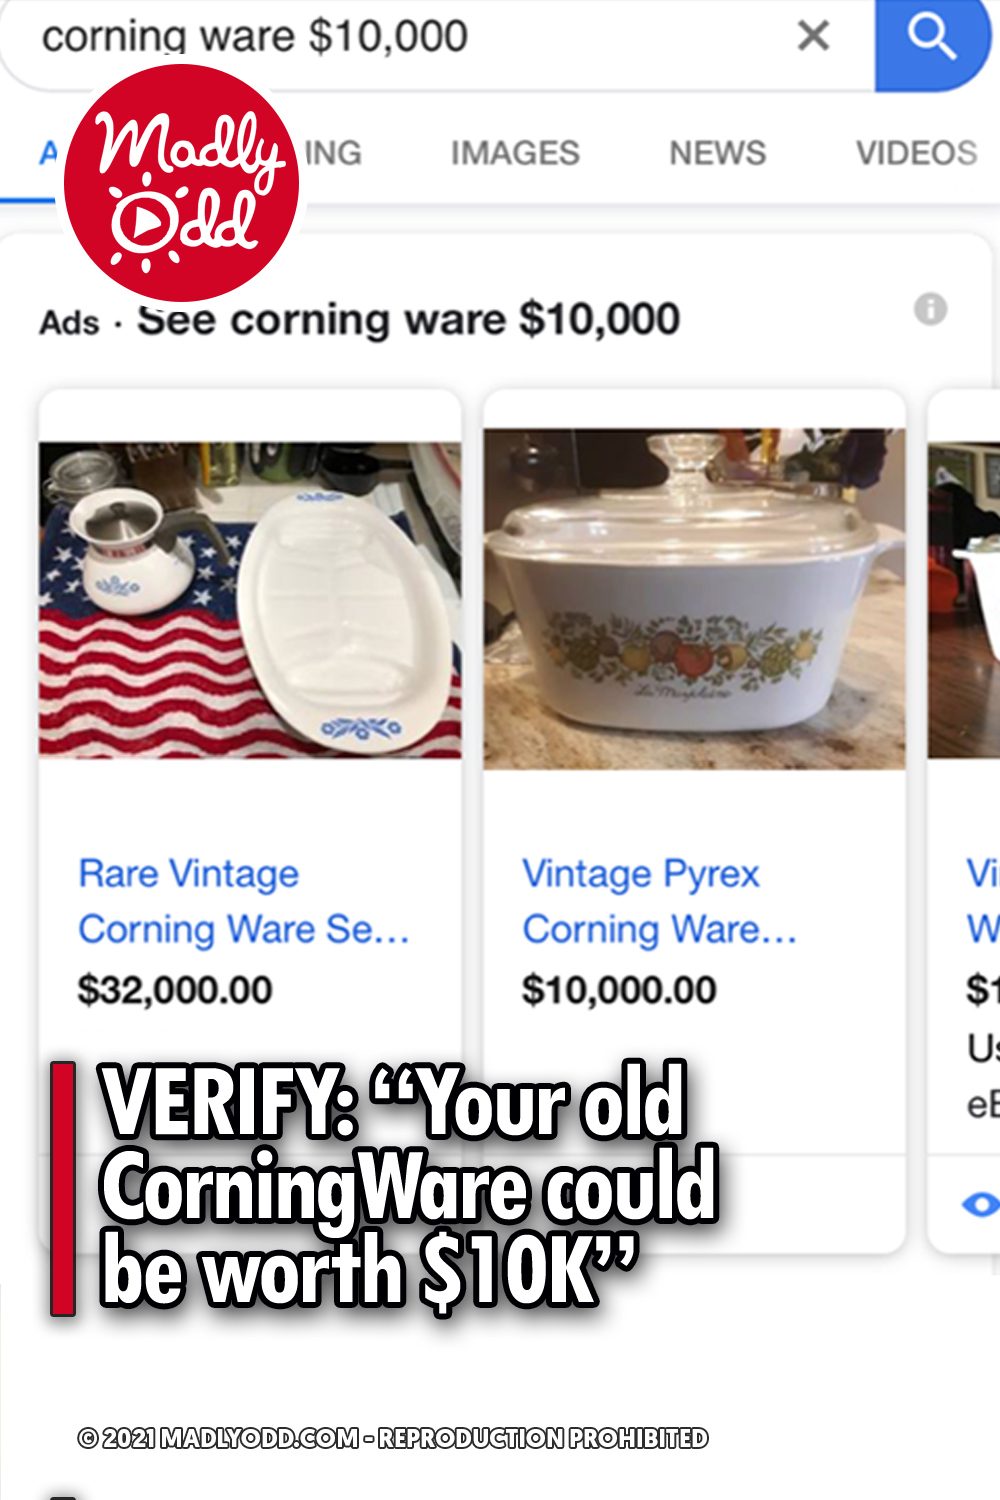 VERIFY: “Your old CorningWare could be worth $10K”